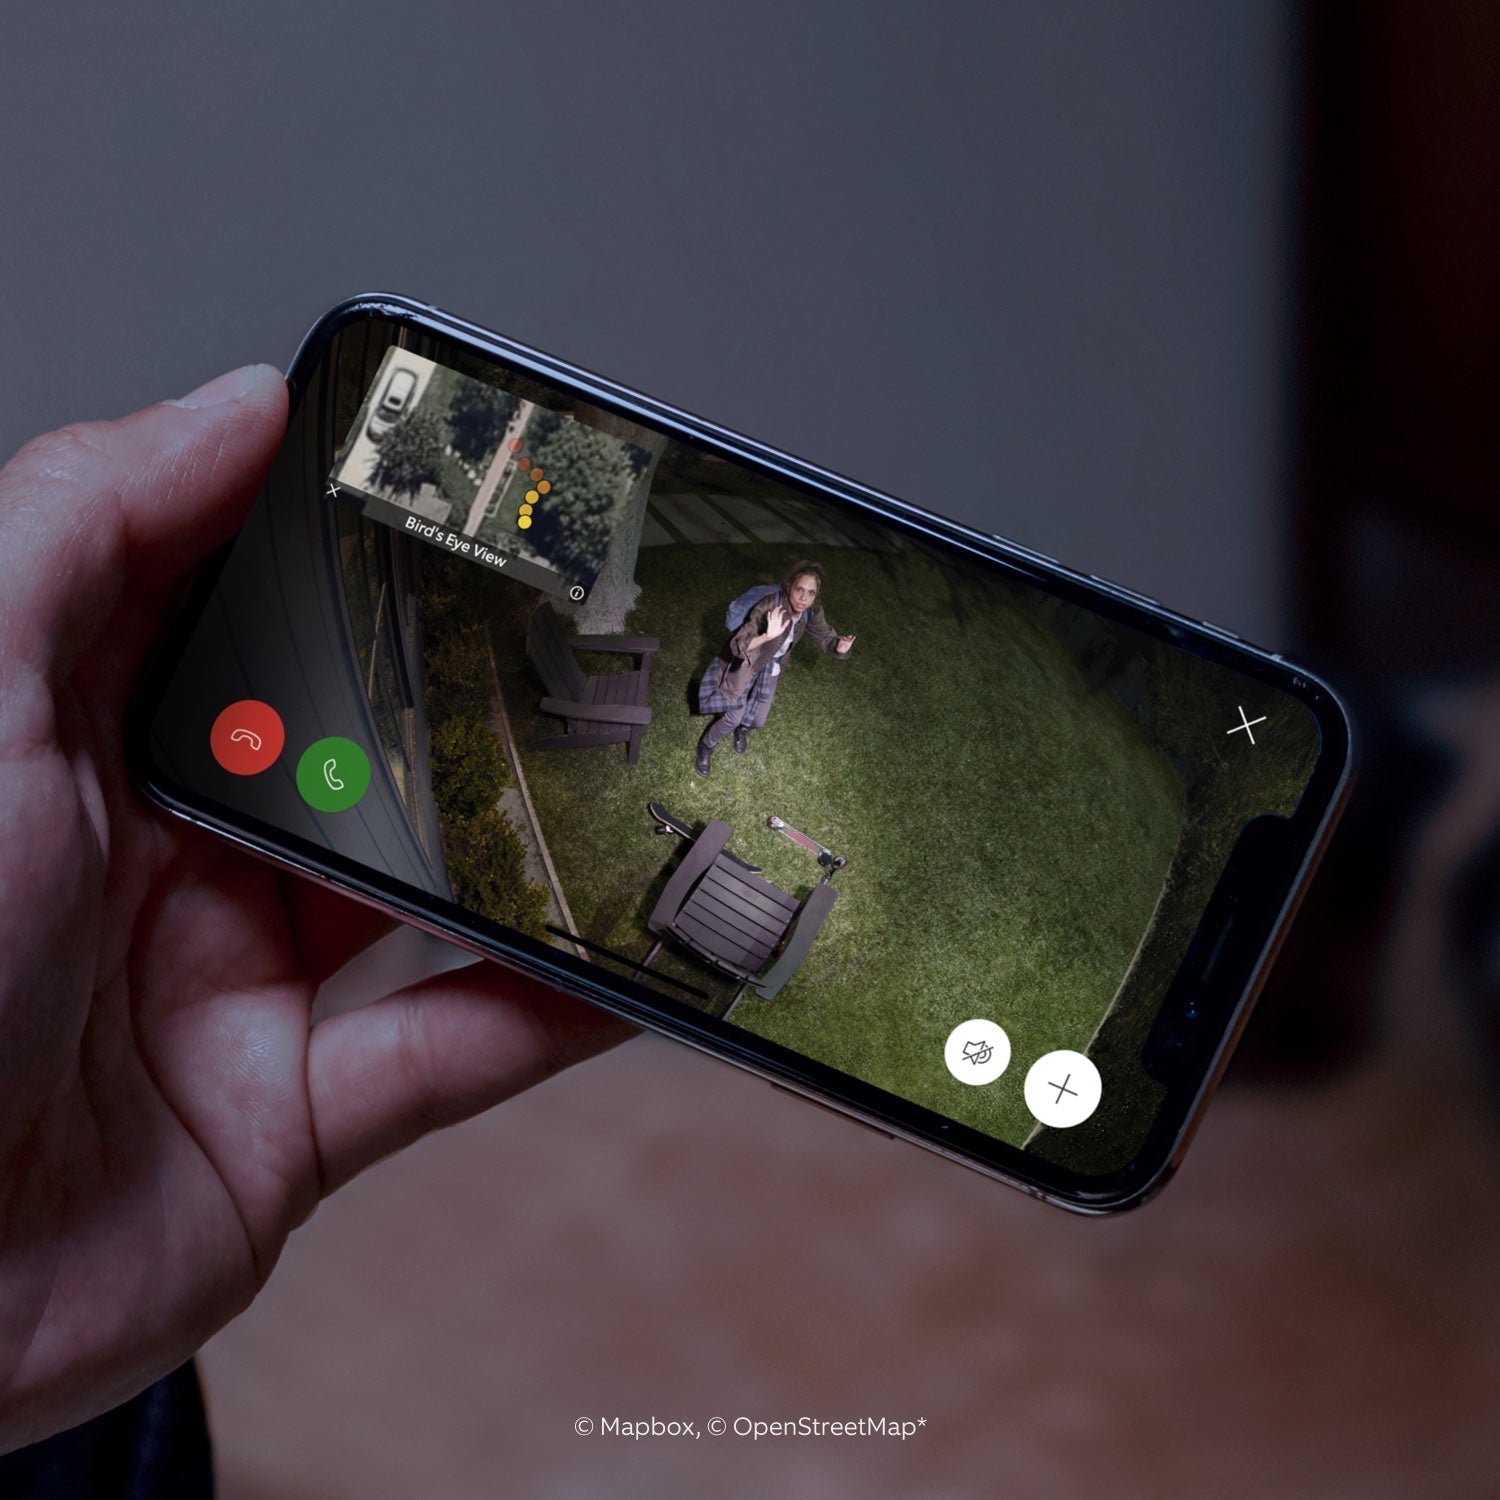 Spotlight Cam Pro (Plug-In) - Close-up of smartphone showing video of a person in a yard, looking up into Spotlight Cam Pro camera. Inset is bird's eye view perspective.